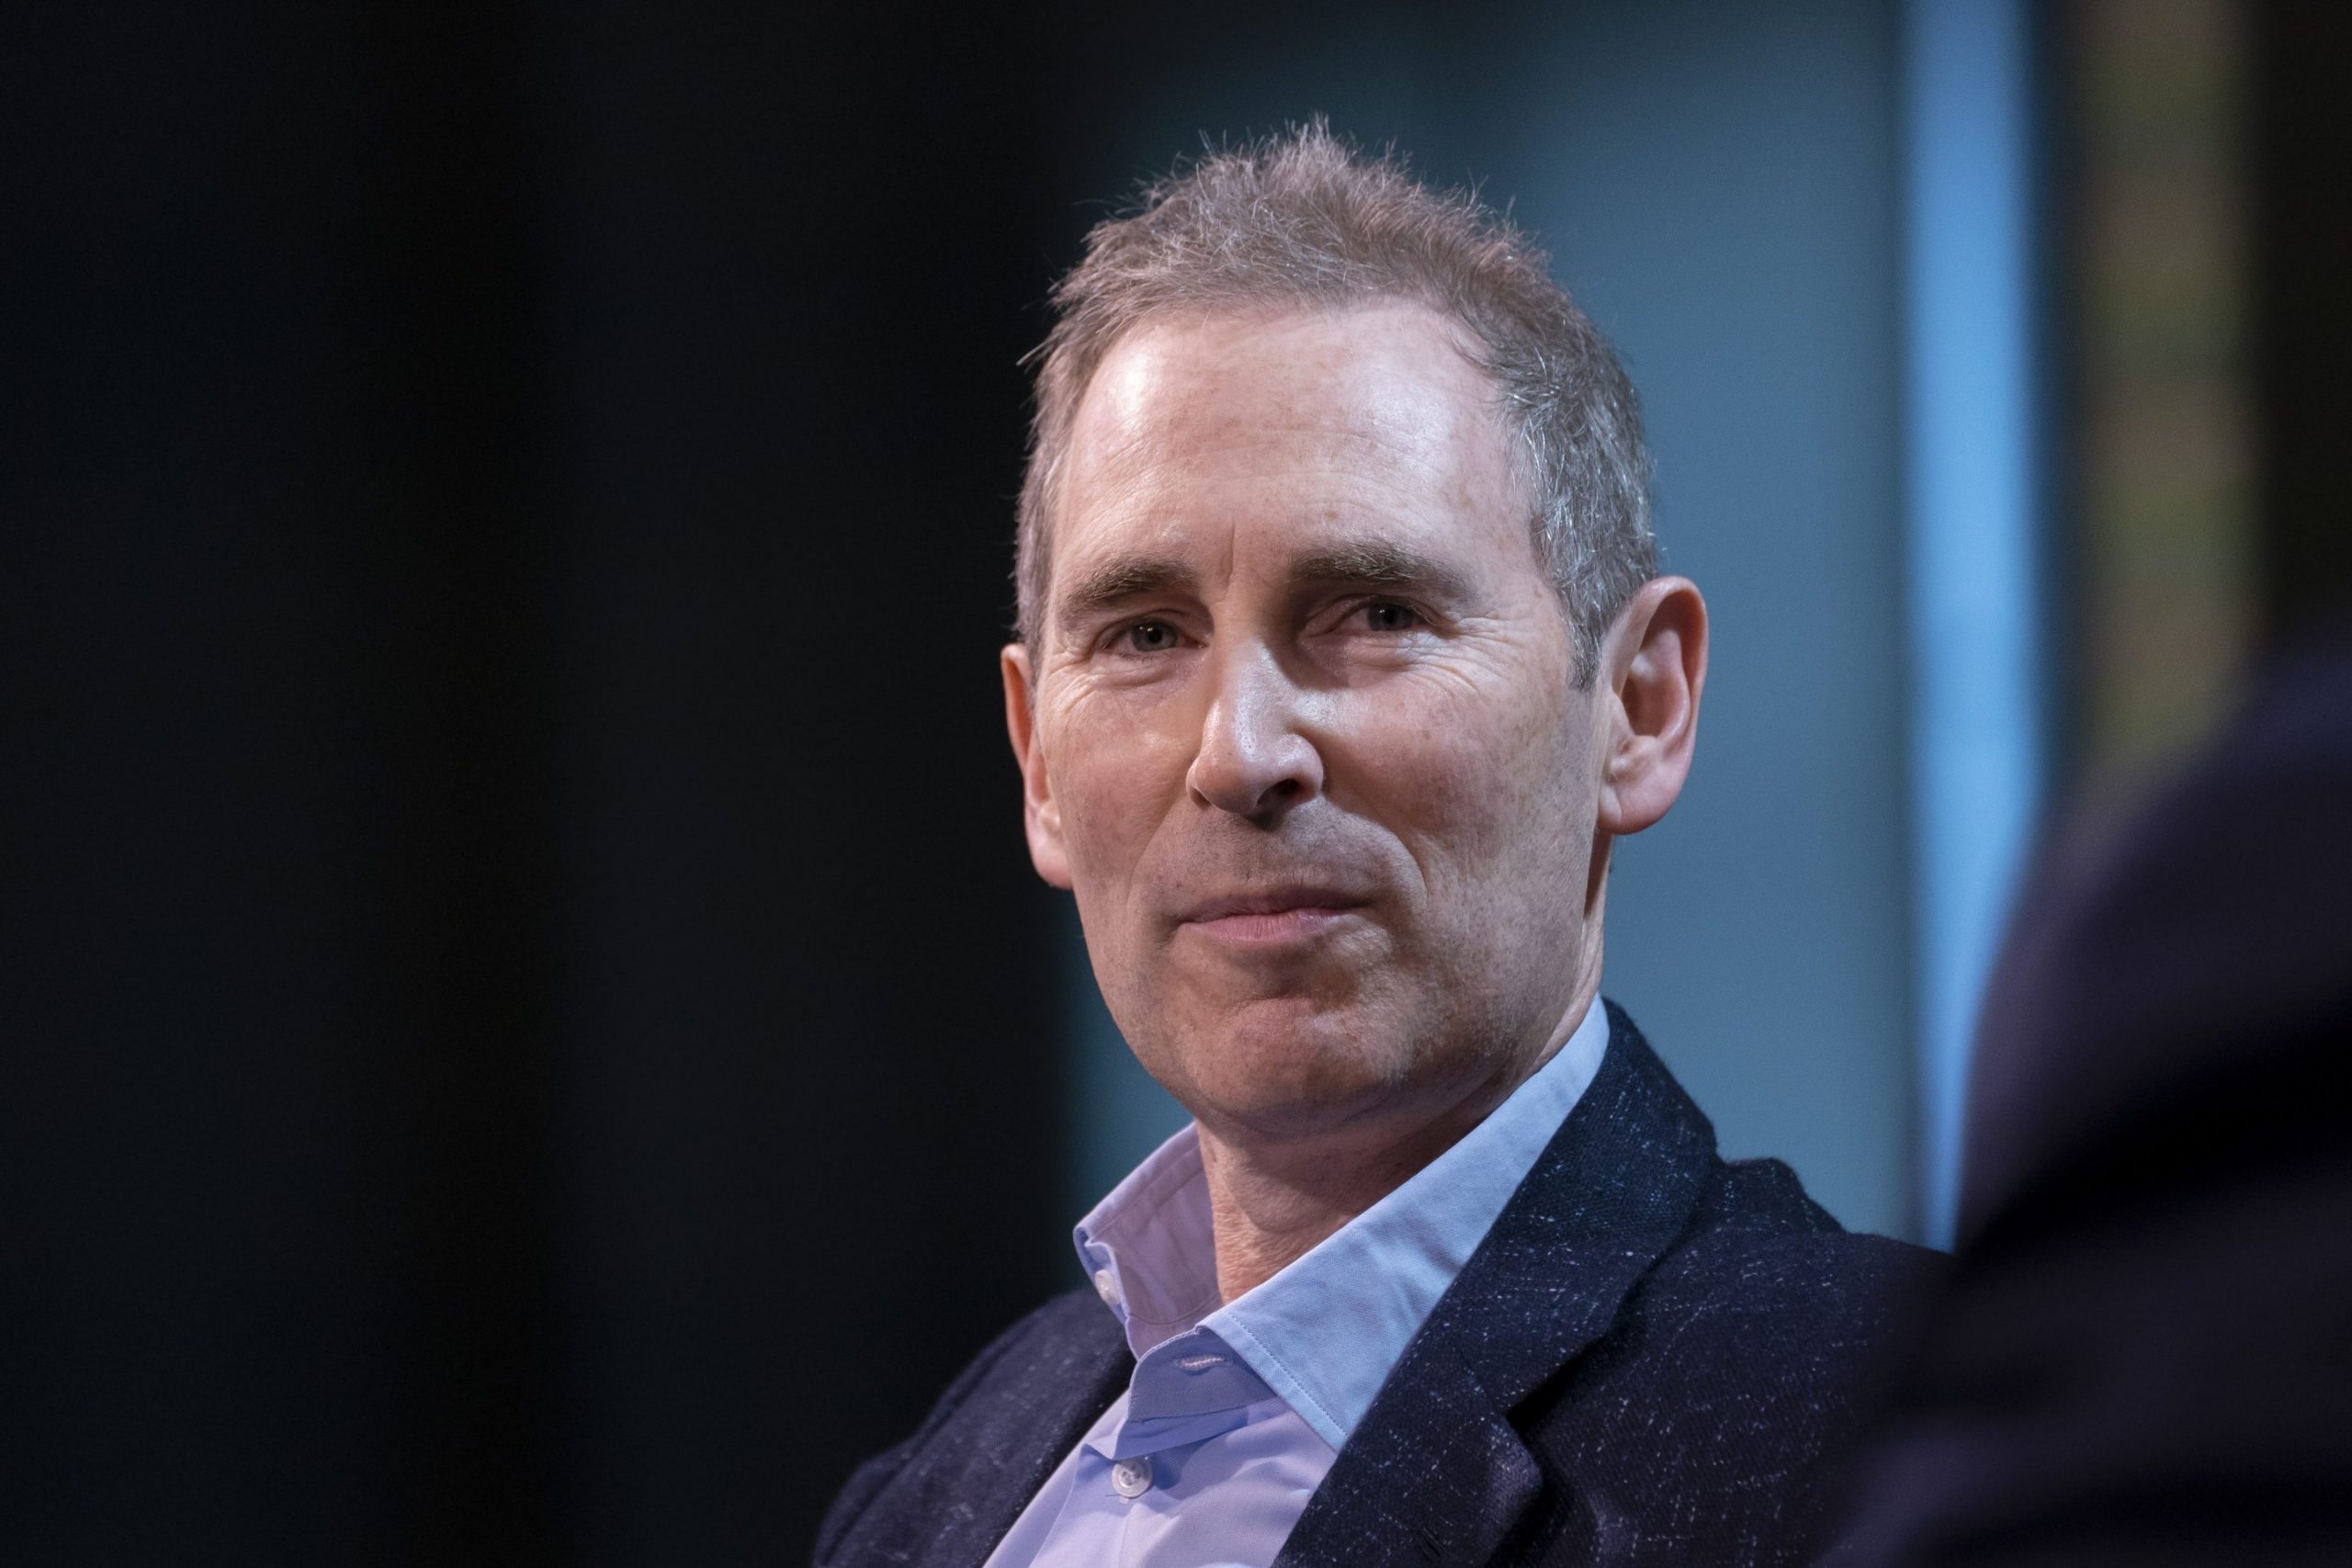 Amazon CEO Andy Jassy wants to reduce the rate of workplace injuries in its facilities